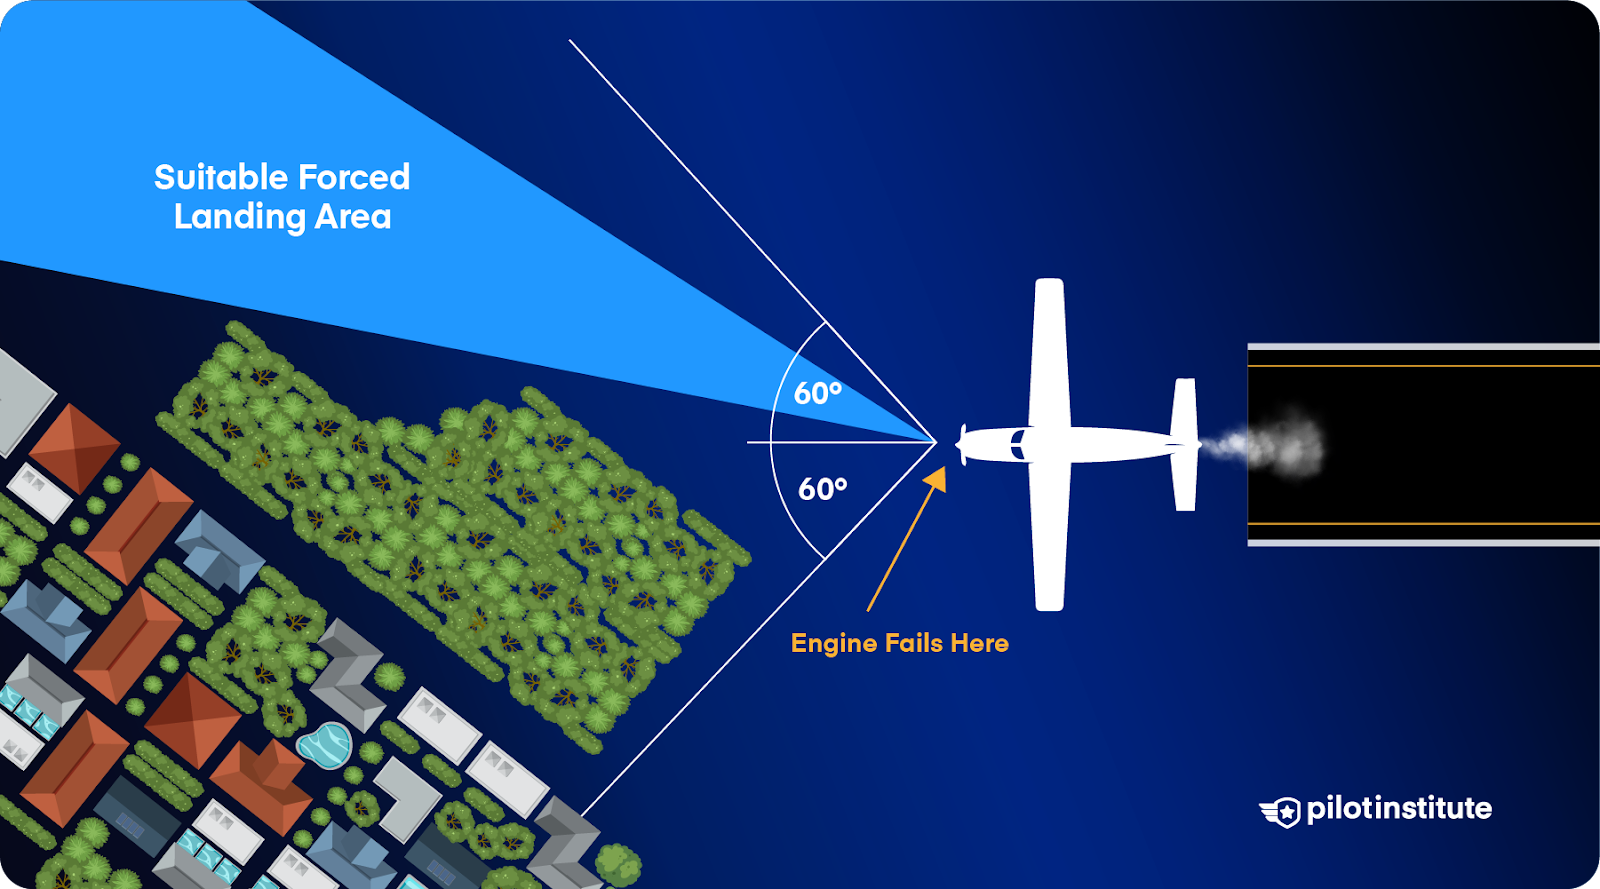 Diagram of pilot searching 60 degrees to either side of the aircraft for a suitable forced landing area.